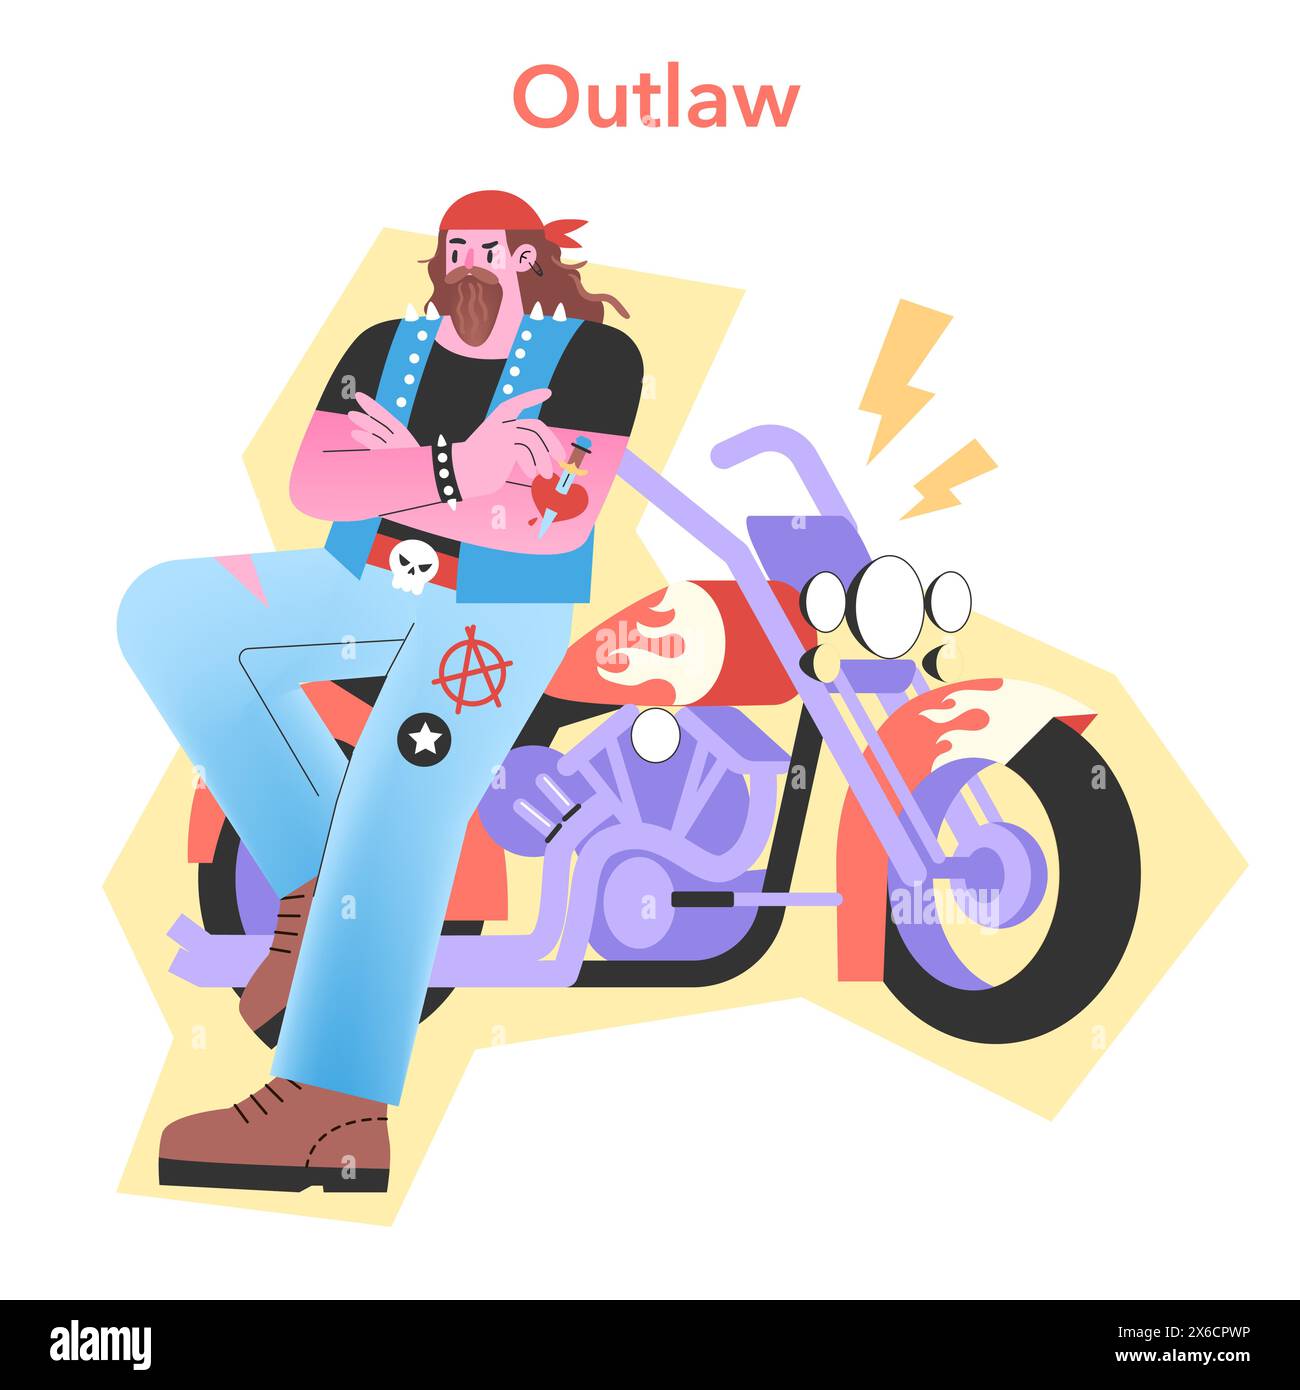 Outlaw Archetype illustration. A rebellious biker exudes freedom and nonconformity, with a thunderous motorcycle backdrop. Edgy and bold vector design. Stock Vector